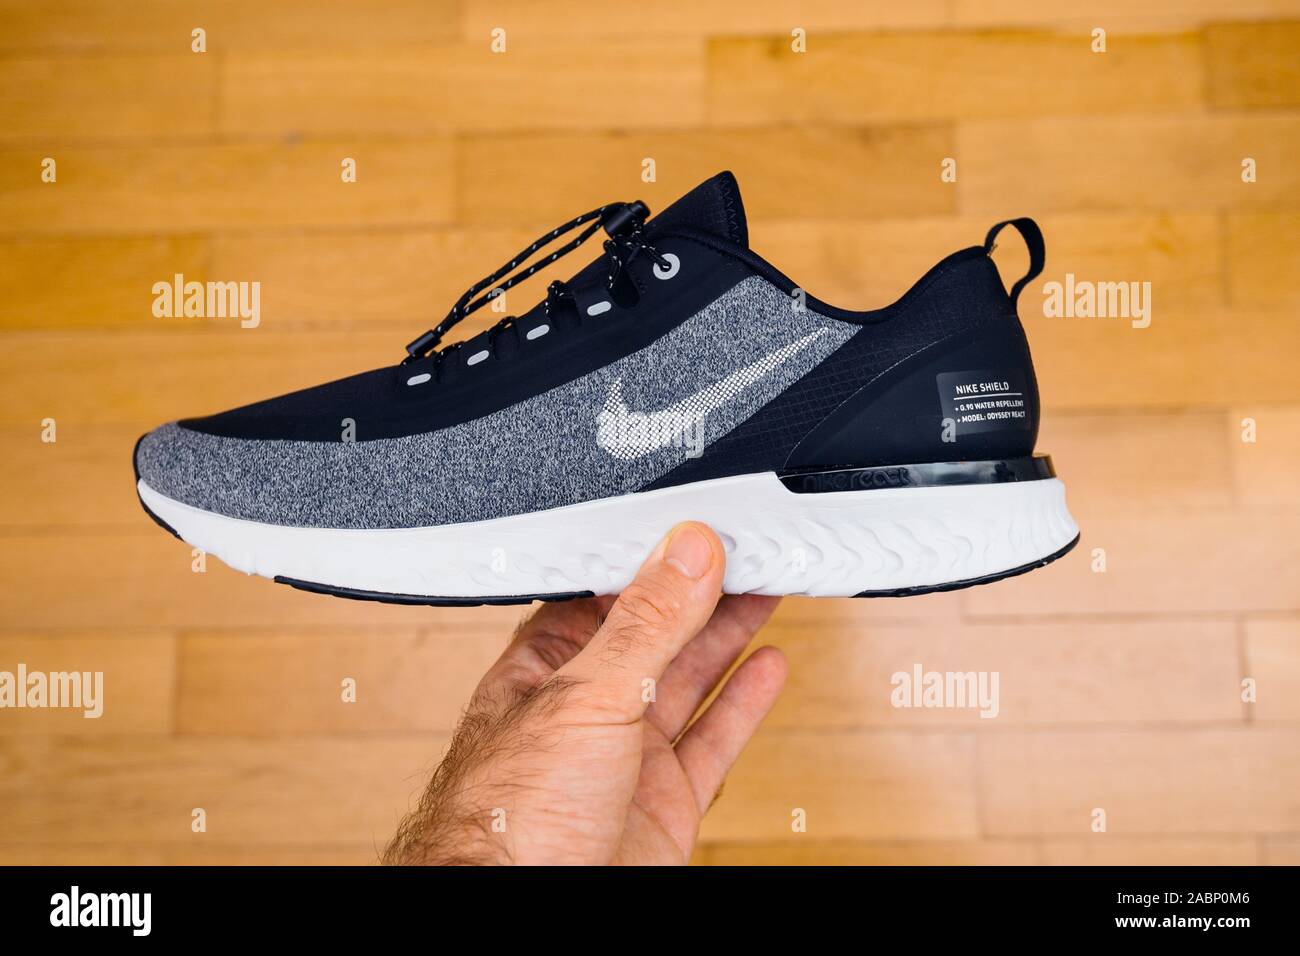 Paris, France - Oct 18, 2019: New edition of waterproof and windproof  running shoe Nike Odyssey React Shield 2 over wooden background Stock Photo  - Alamy